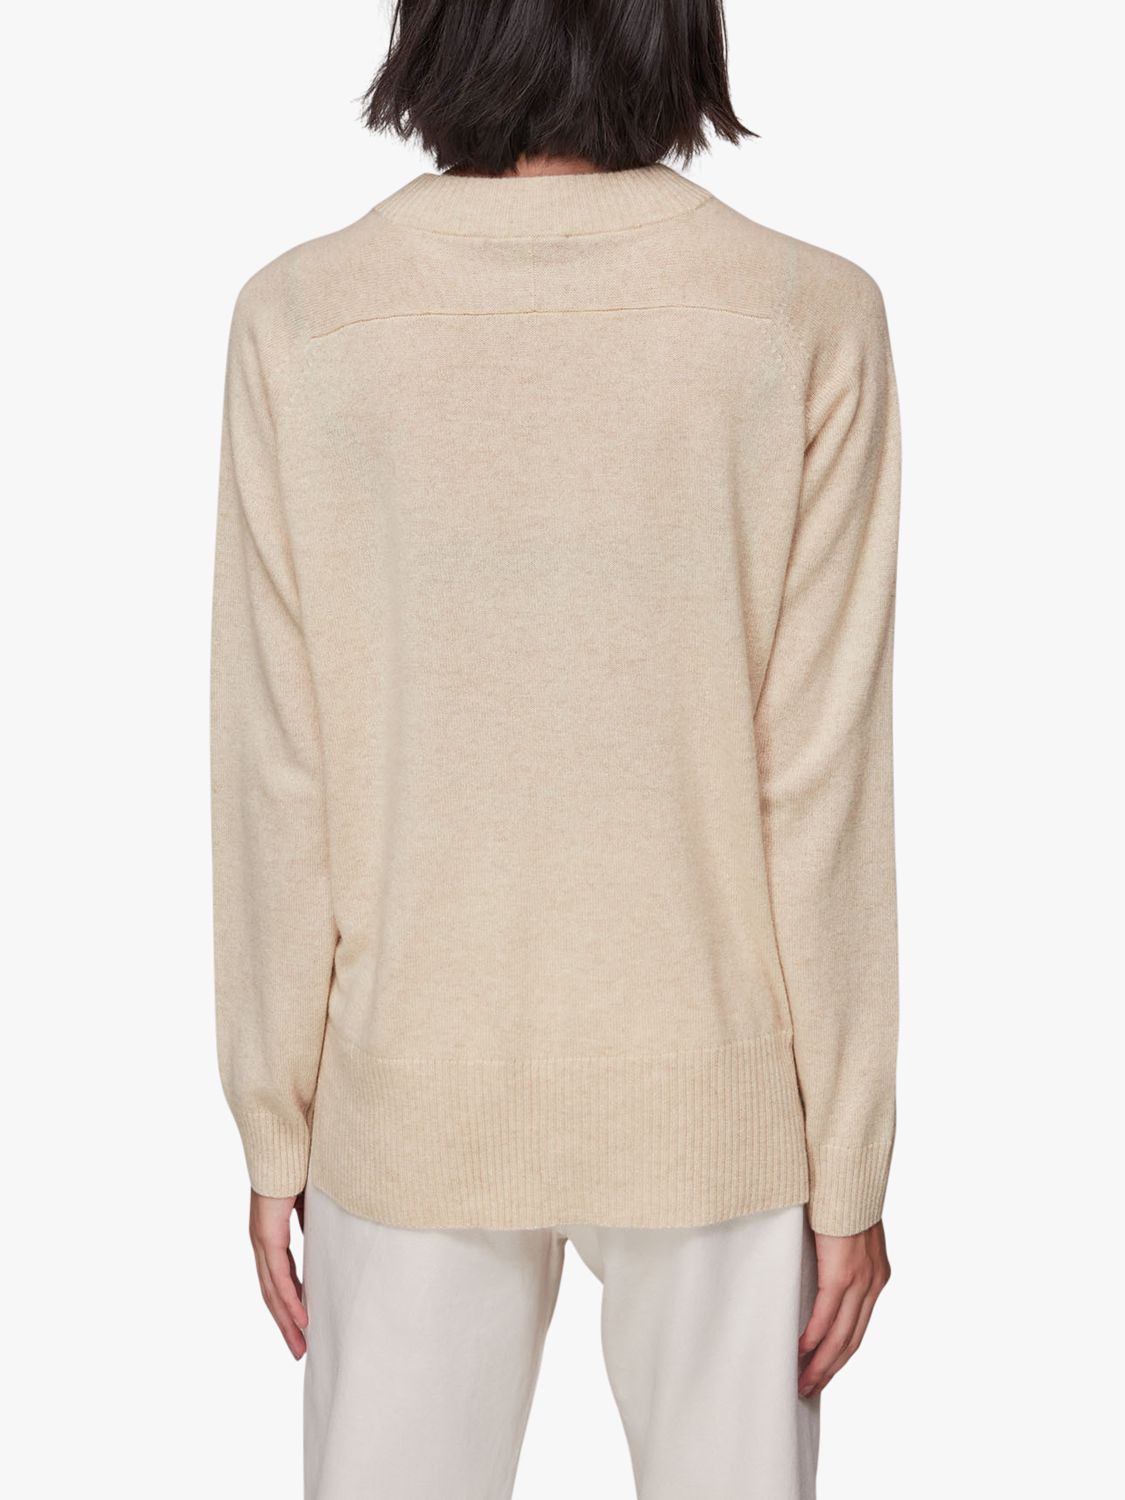 Whistles Cashmere Crew Neck Jumper, Ivory, XS